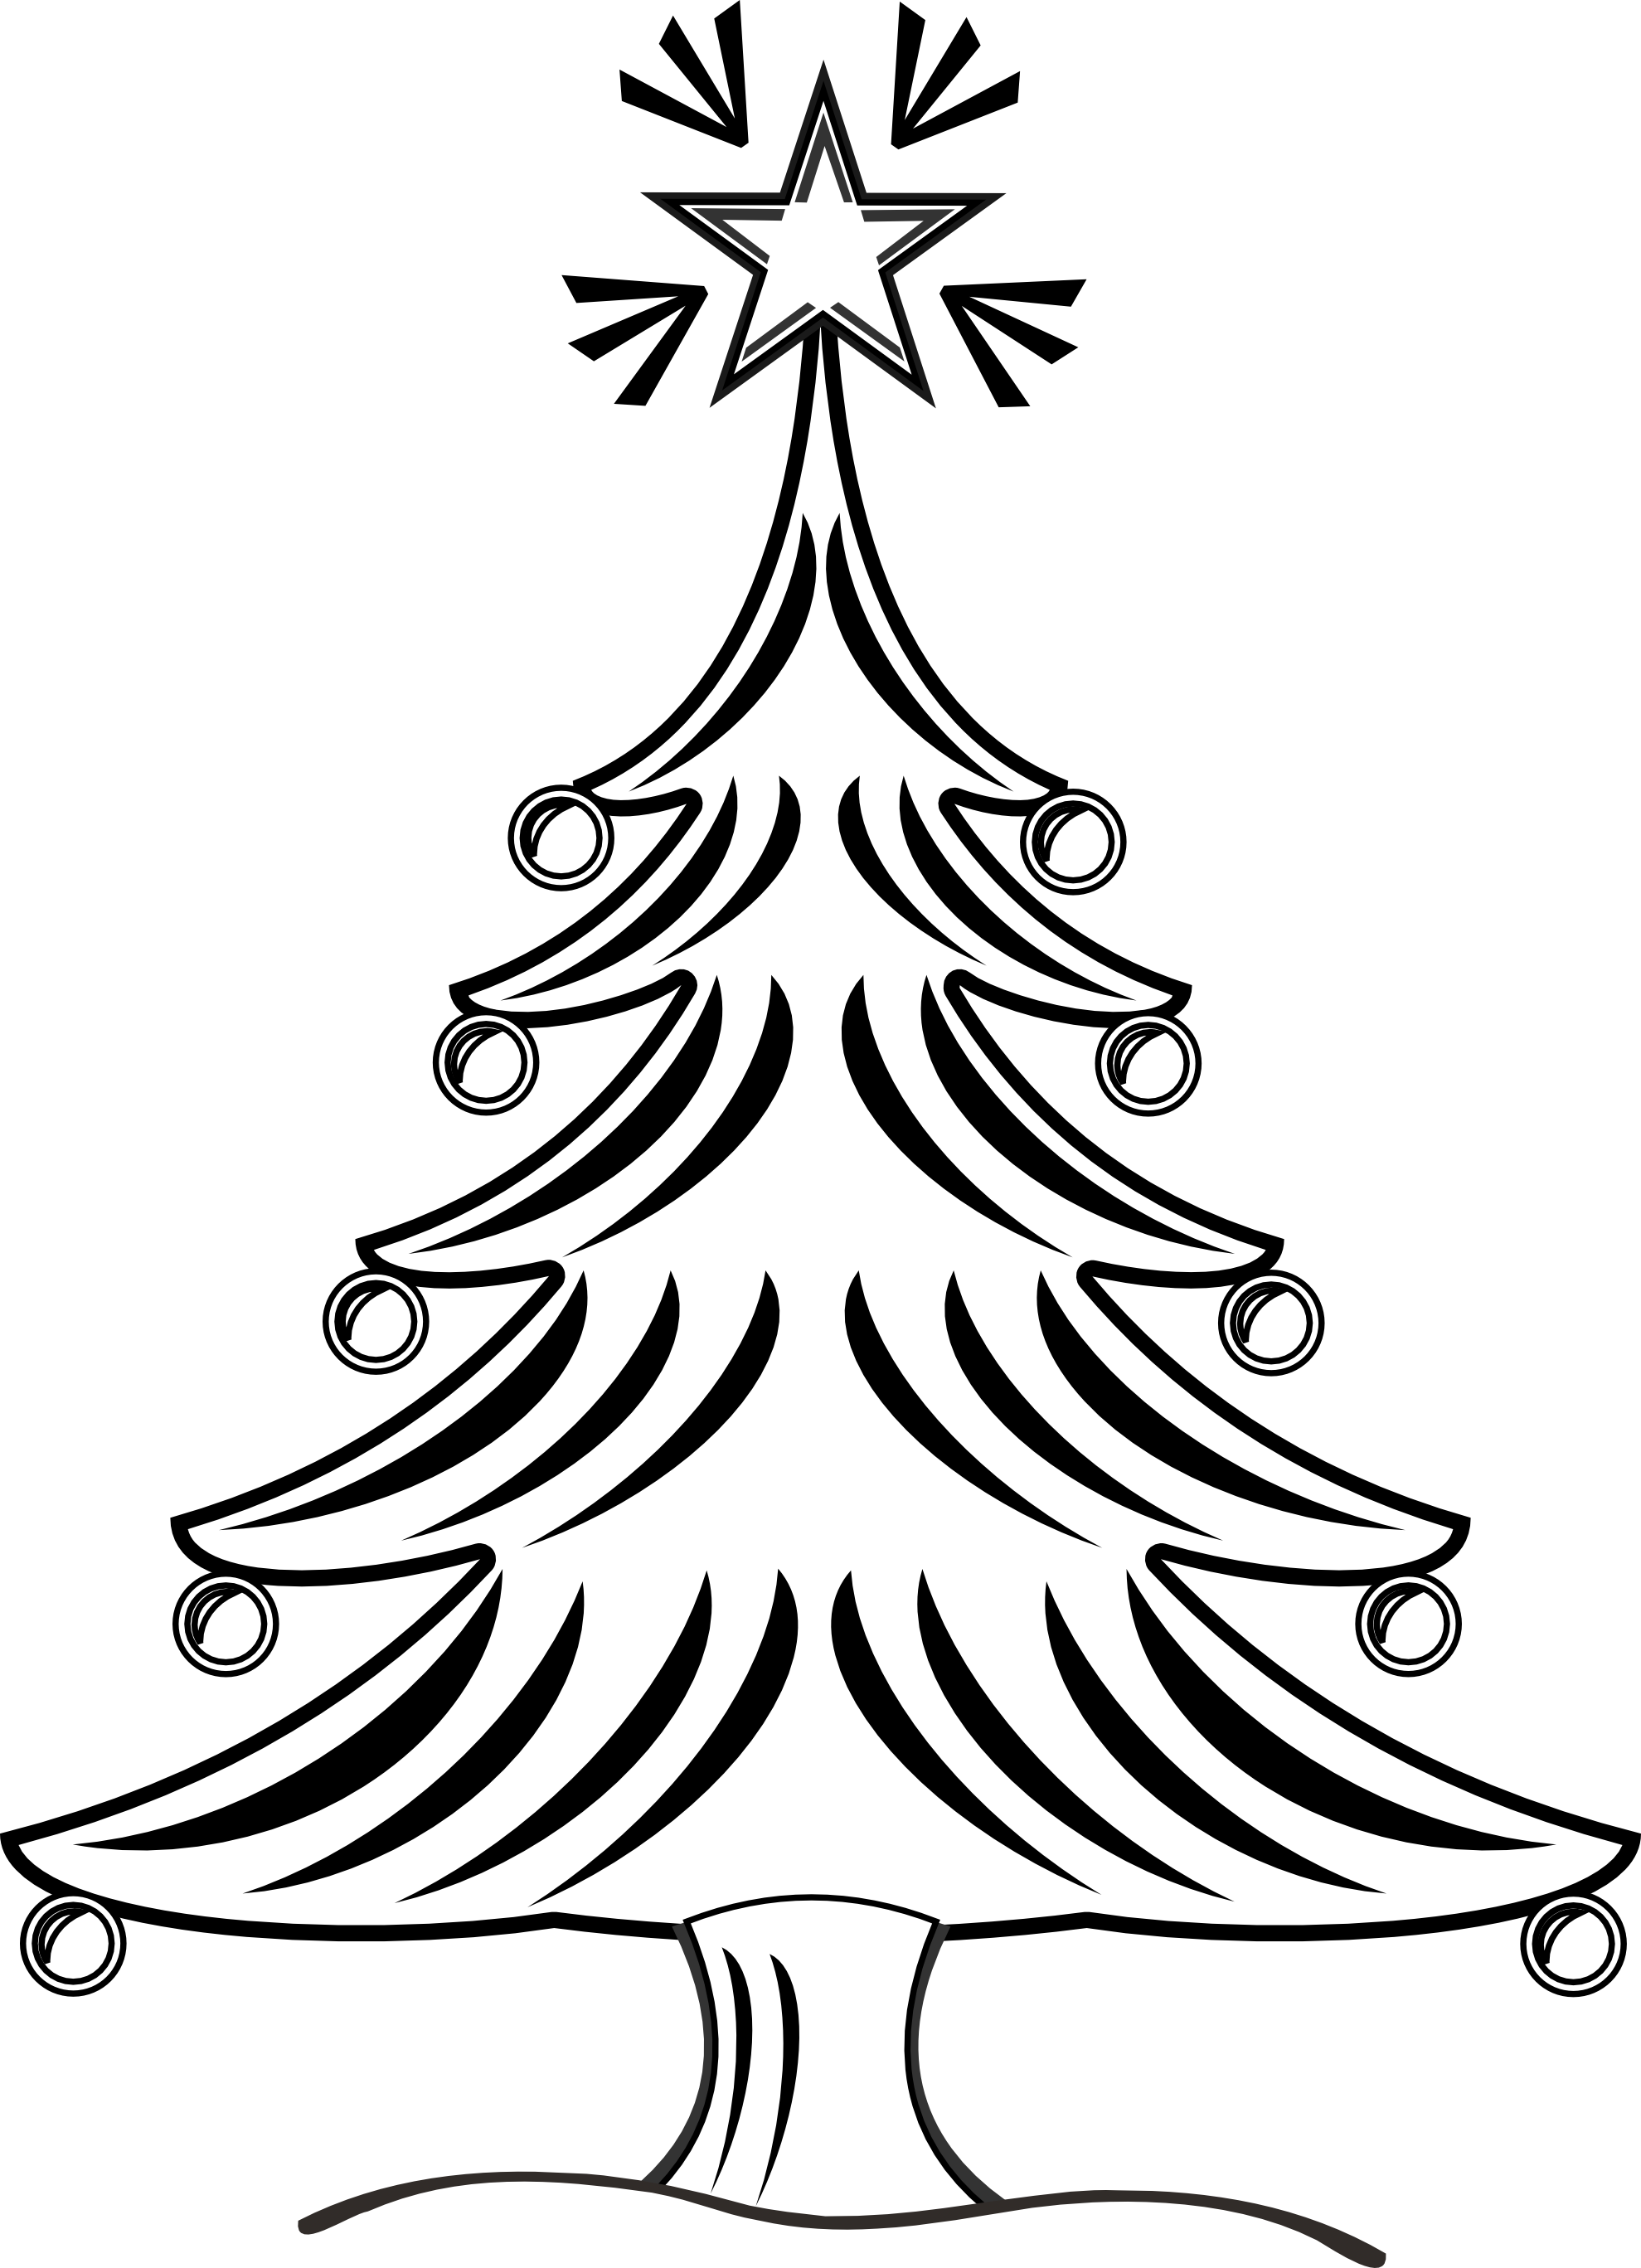 Christmas Present Clipart Black And White | Clipart Panda - Free ...